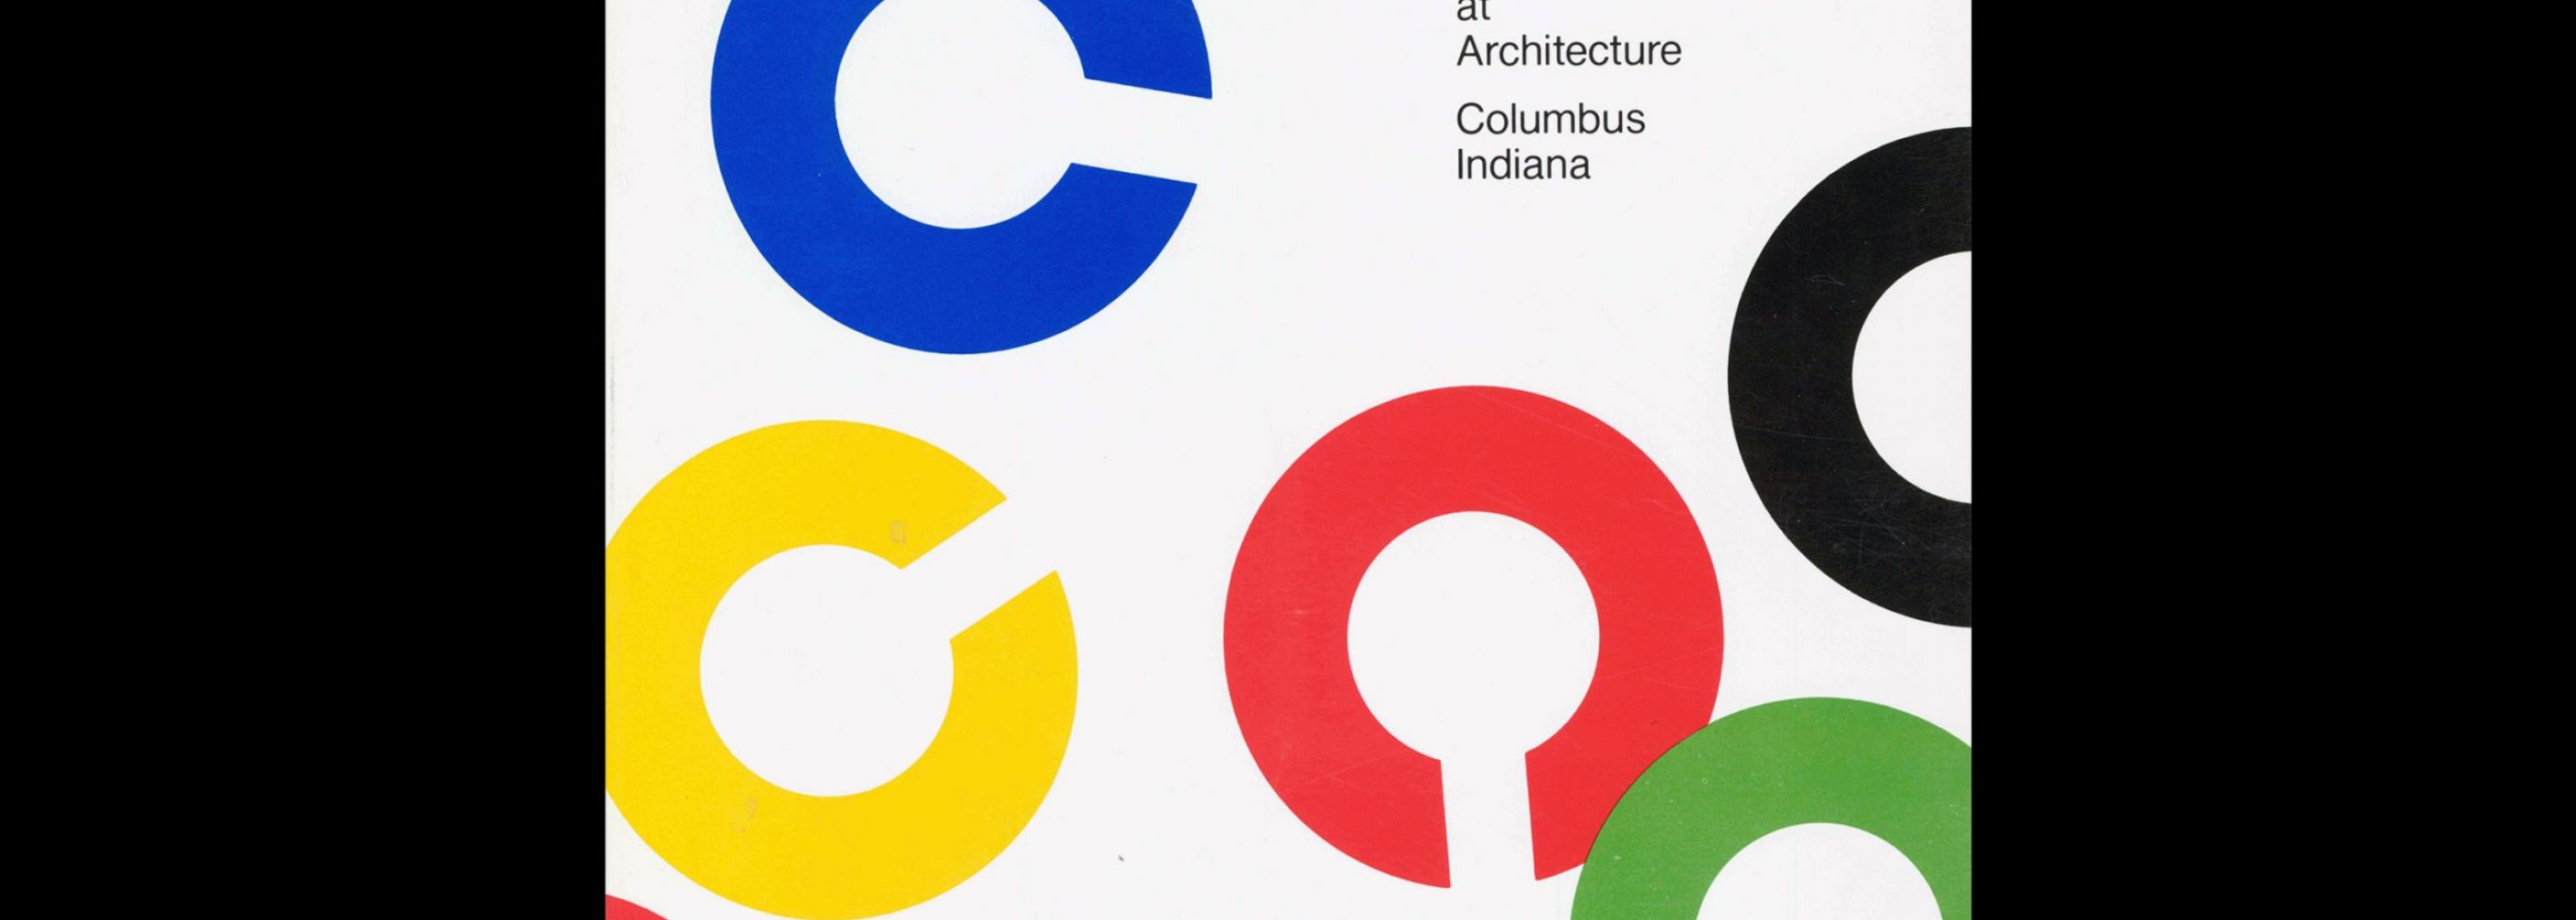 A Look at Architecture, Columbus Indiana 1860-1974, 1991. Typography and design by Paul Rand